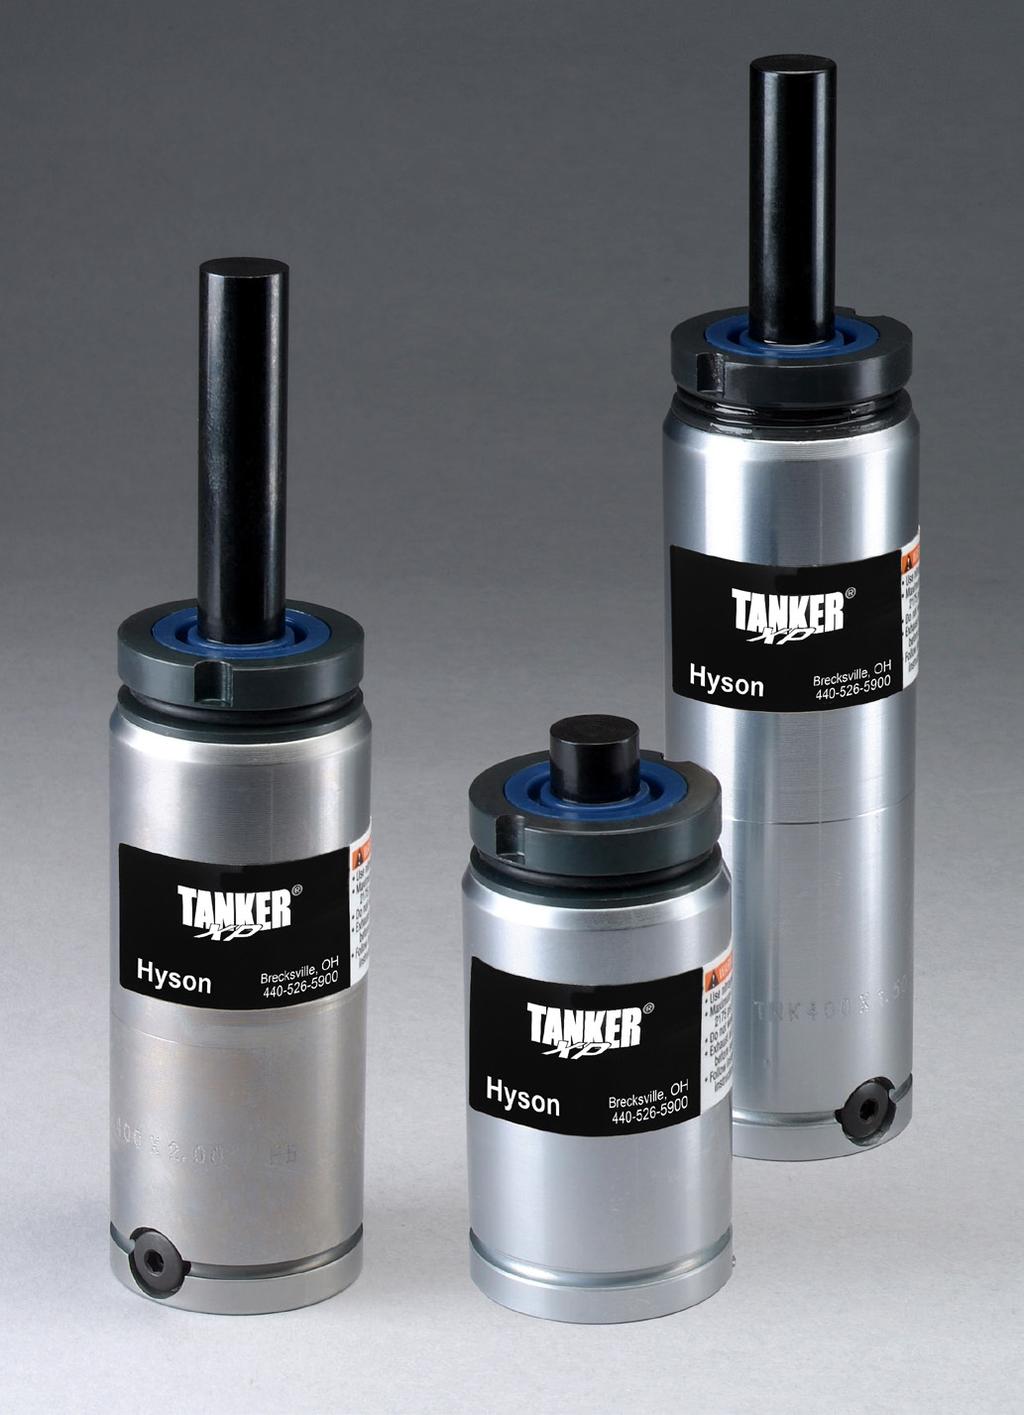 Tanker 400 XP Series Nitrogen Gas Springs IDEAL NITROGEN GAS SPRINGS FOR HIGH PERFORMANCE AND HIGH SPEED Table of Contents Page Product Value...1 Product Features....1 Advanced Safety Features.